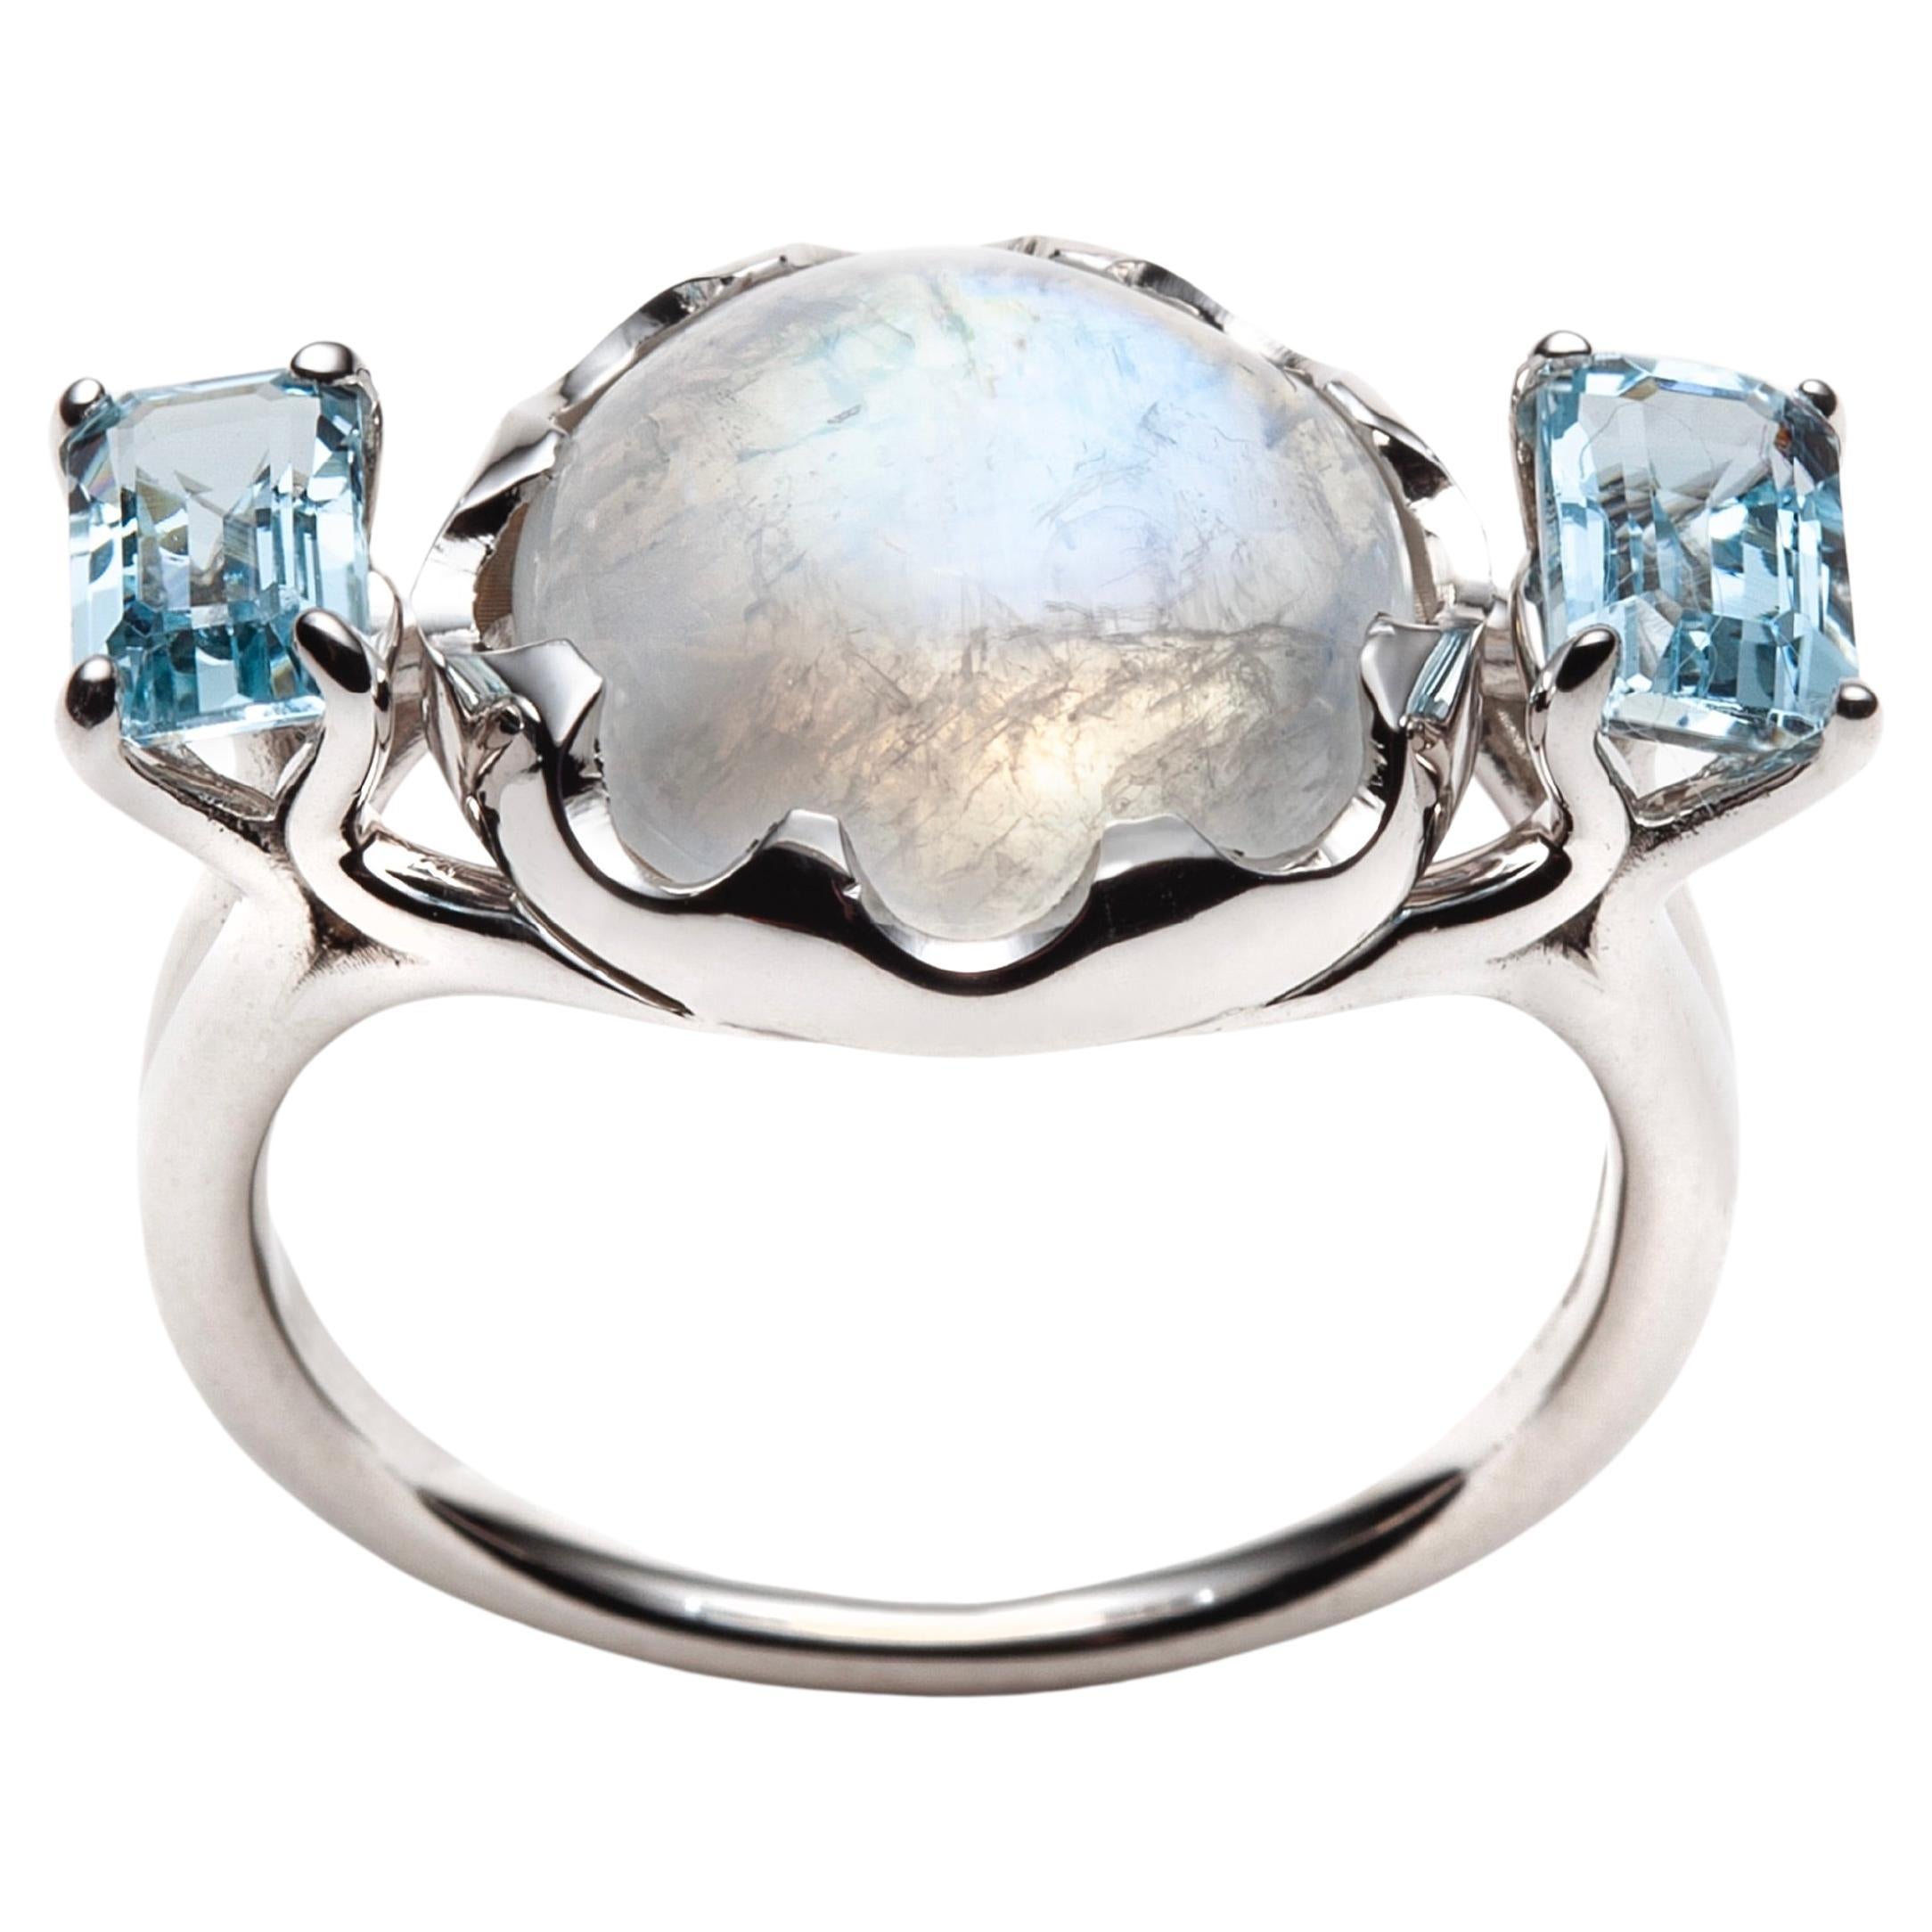 14k White Gold Ring with Round Moonstone Cabochon + Two Emerald-cut Aquamarines